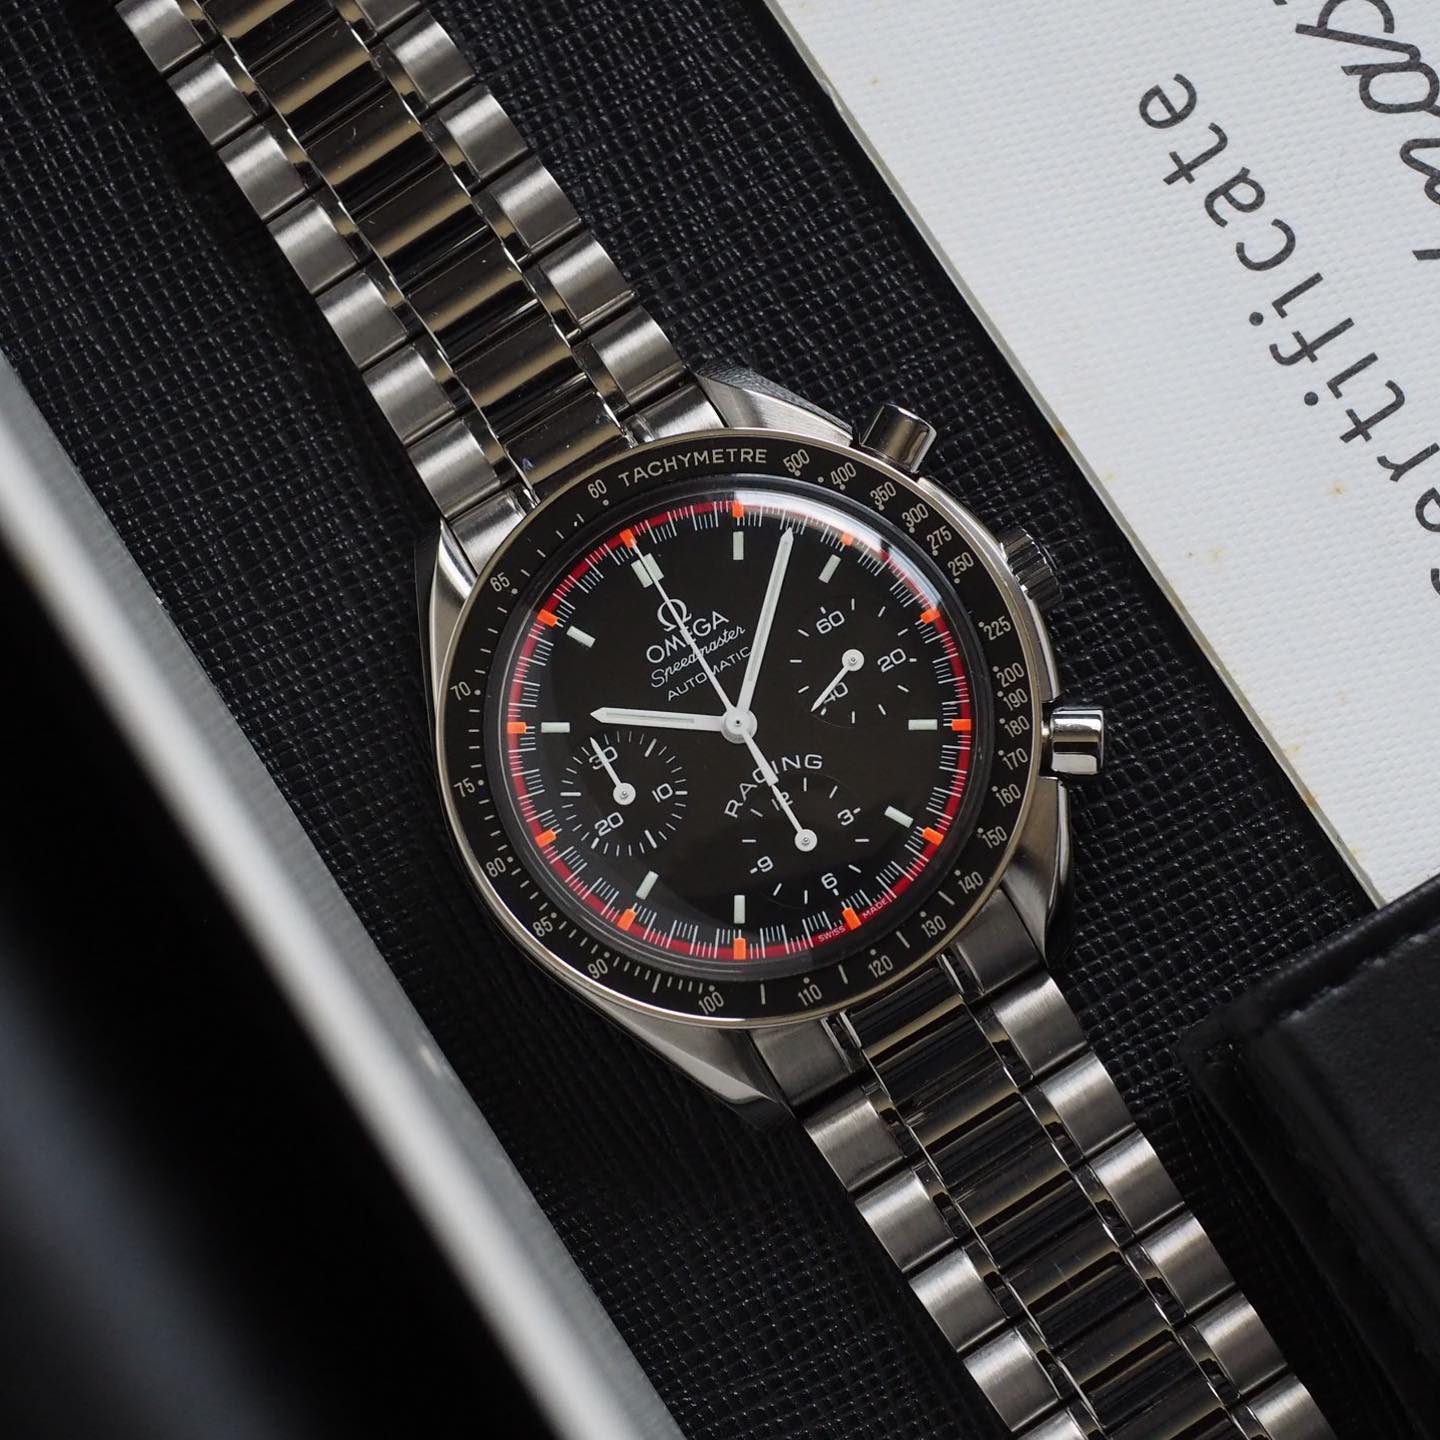 Schumacher dark dial with “Racing” print and checkered pattern. Orange and red outer ring along the seconds track. White hands. Painted indices with luminescent material. Omega Speedmaster Reduced 3518.50.00